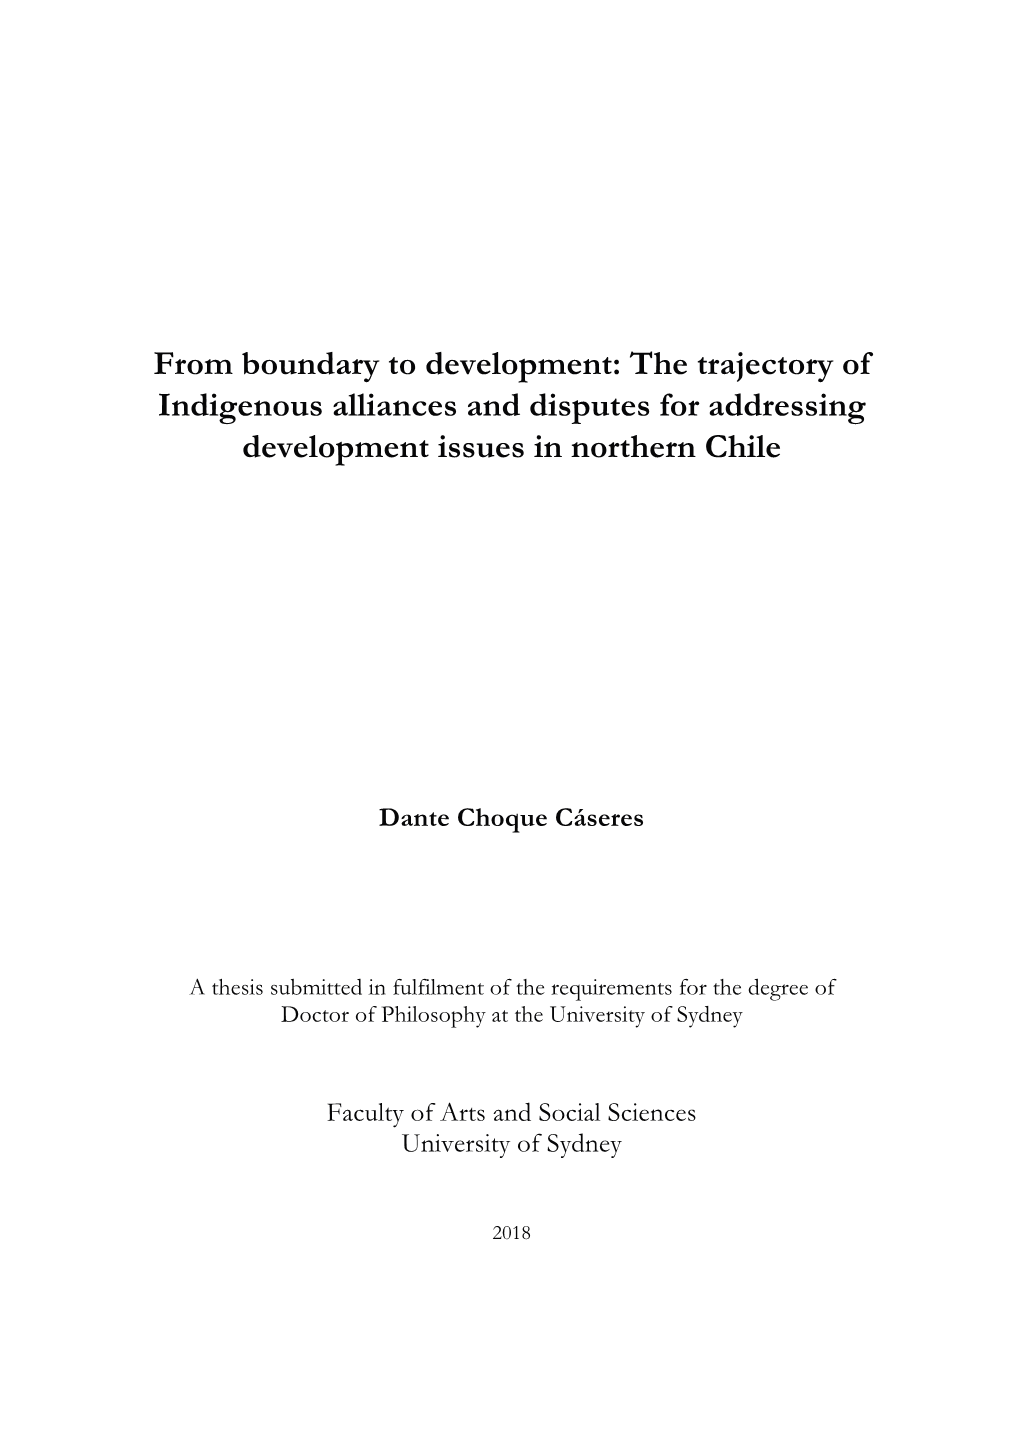 The Trajectory of Indigenous Alliances and Disputes for Addressing Development Issues in Northern Chile